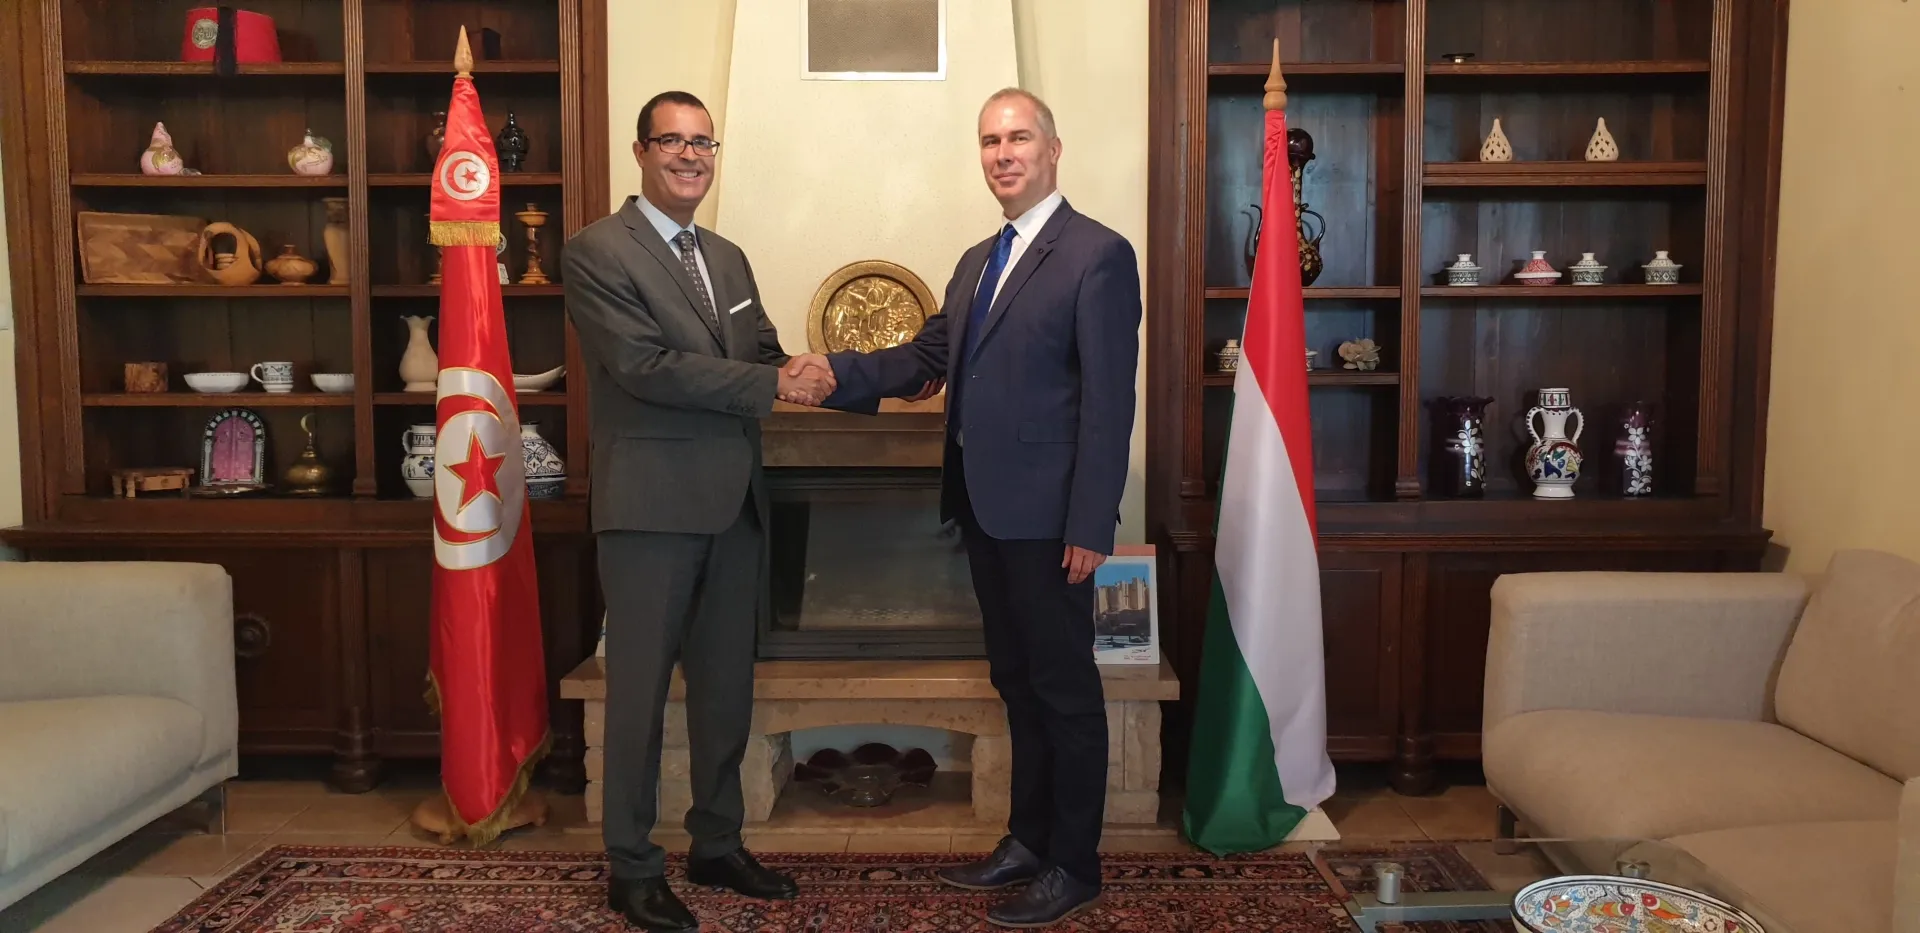 University of Sopron Makes Significant Progress in Collaboration Discussions with Tunisia